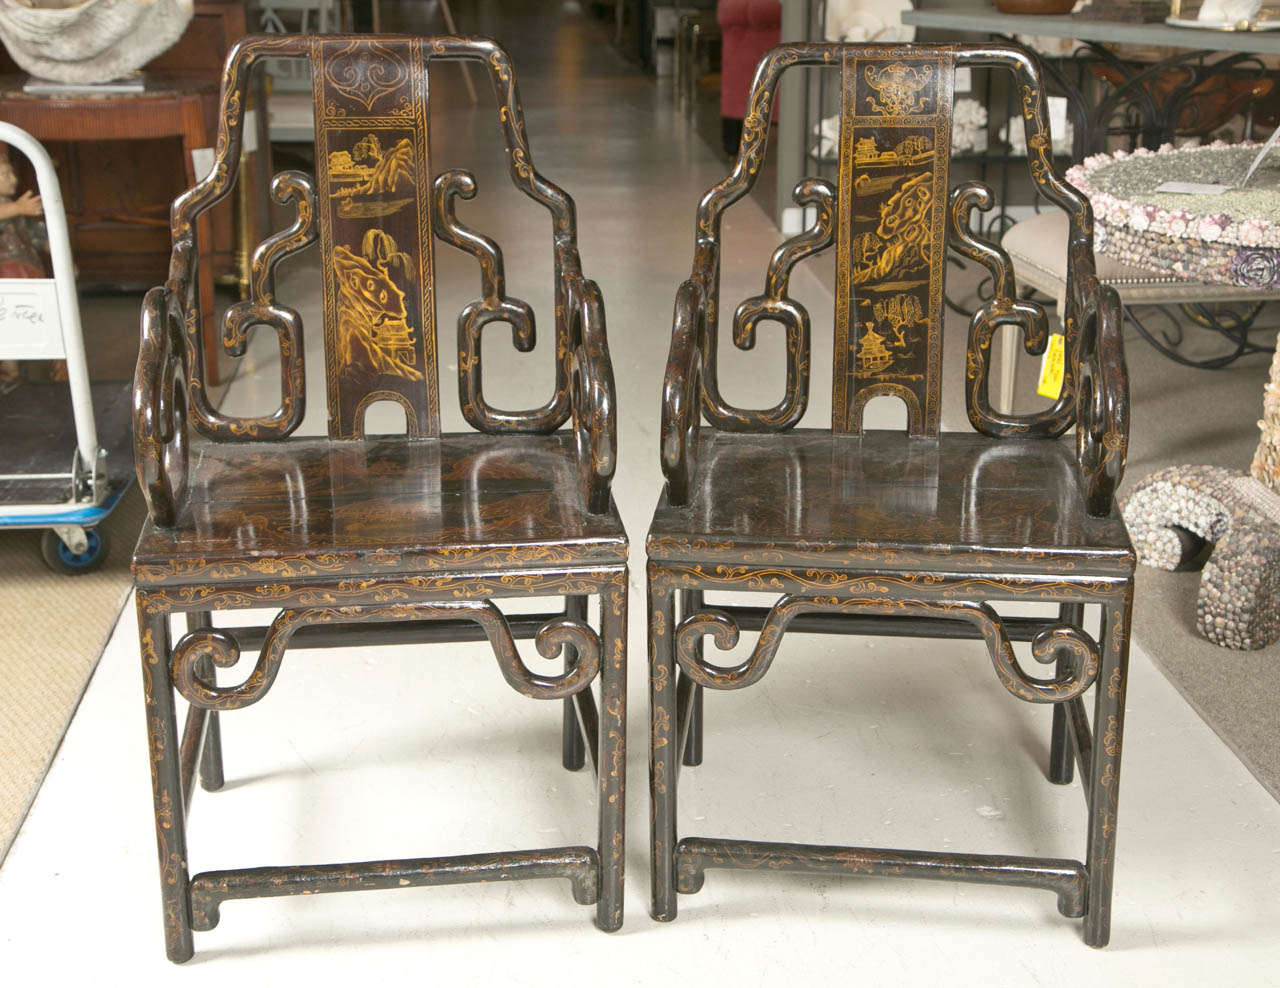 Pair or Antique Chinese lacquered and gilded chairs with chinoiserie detail